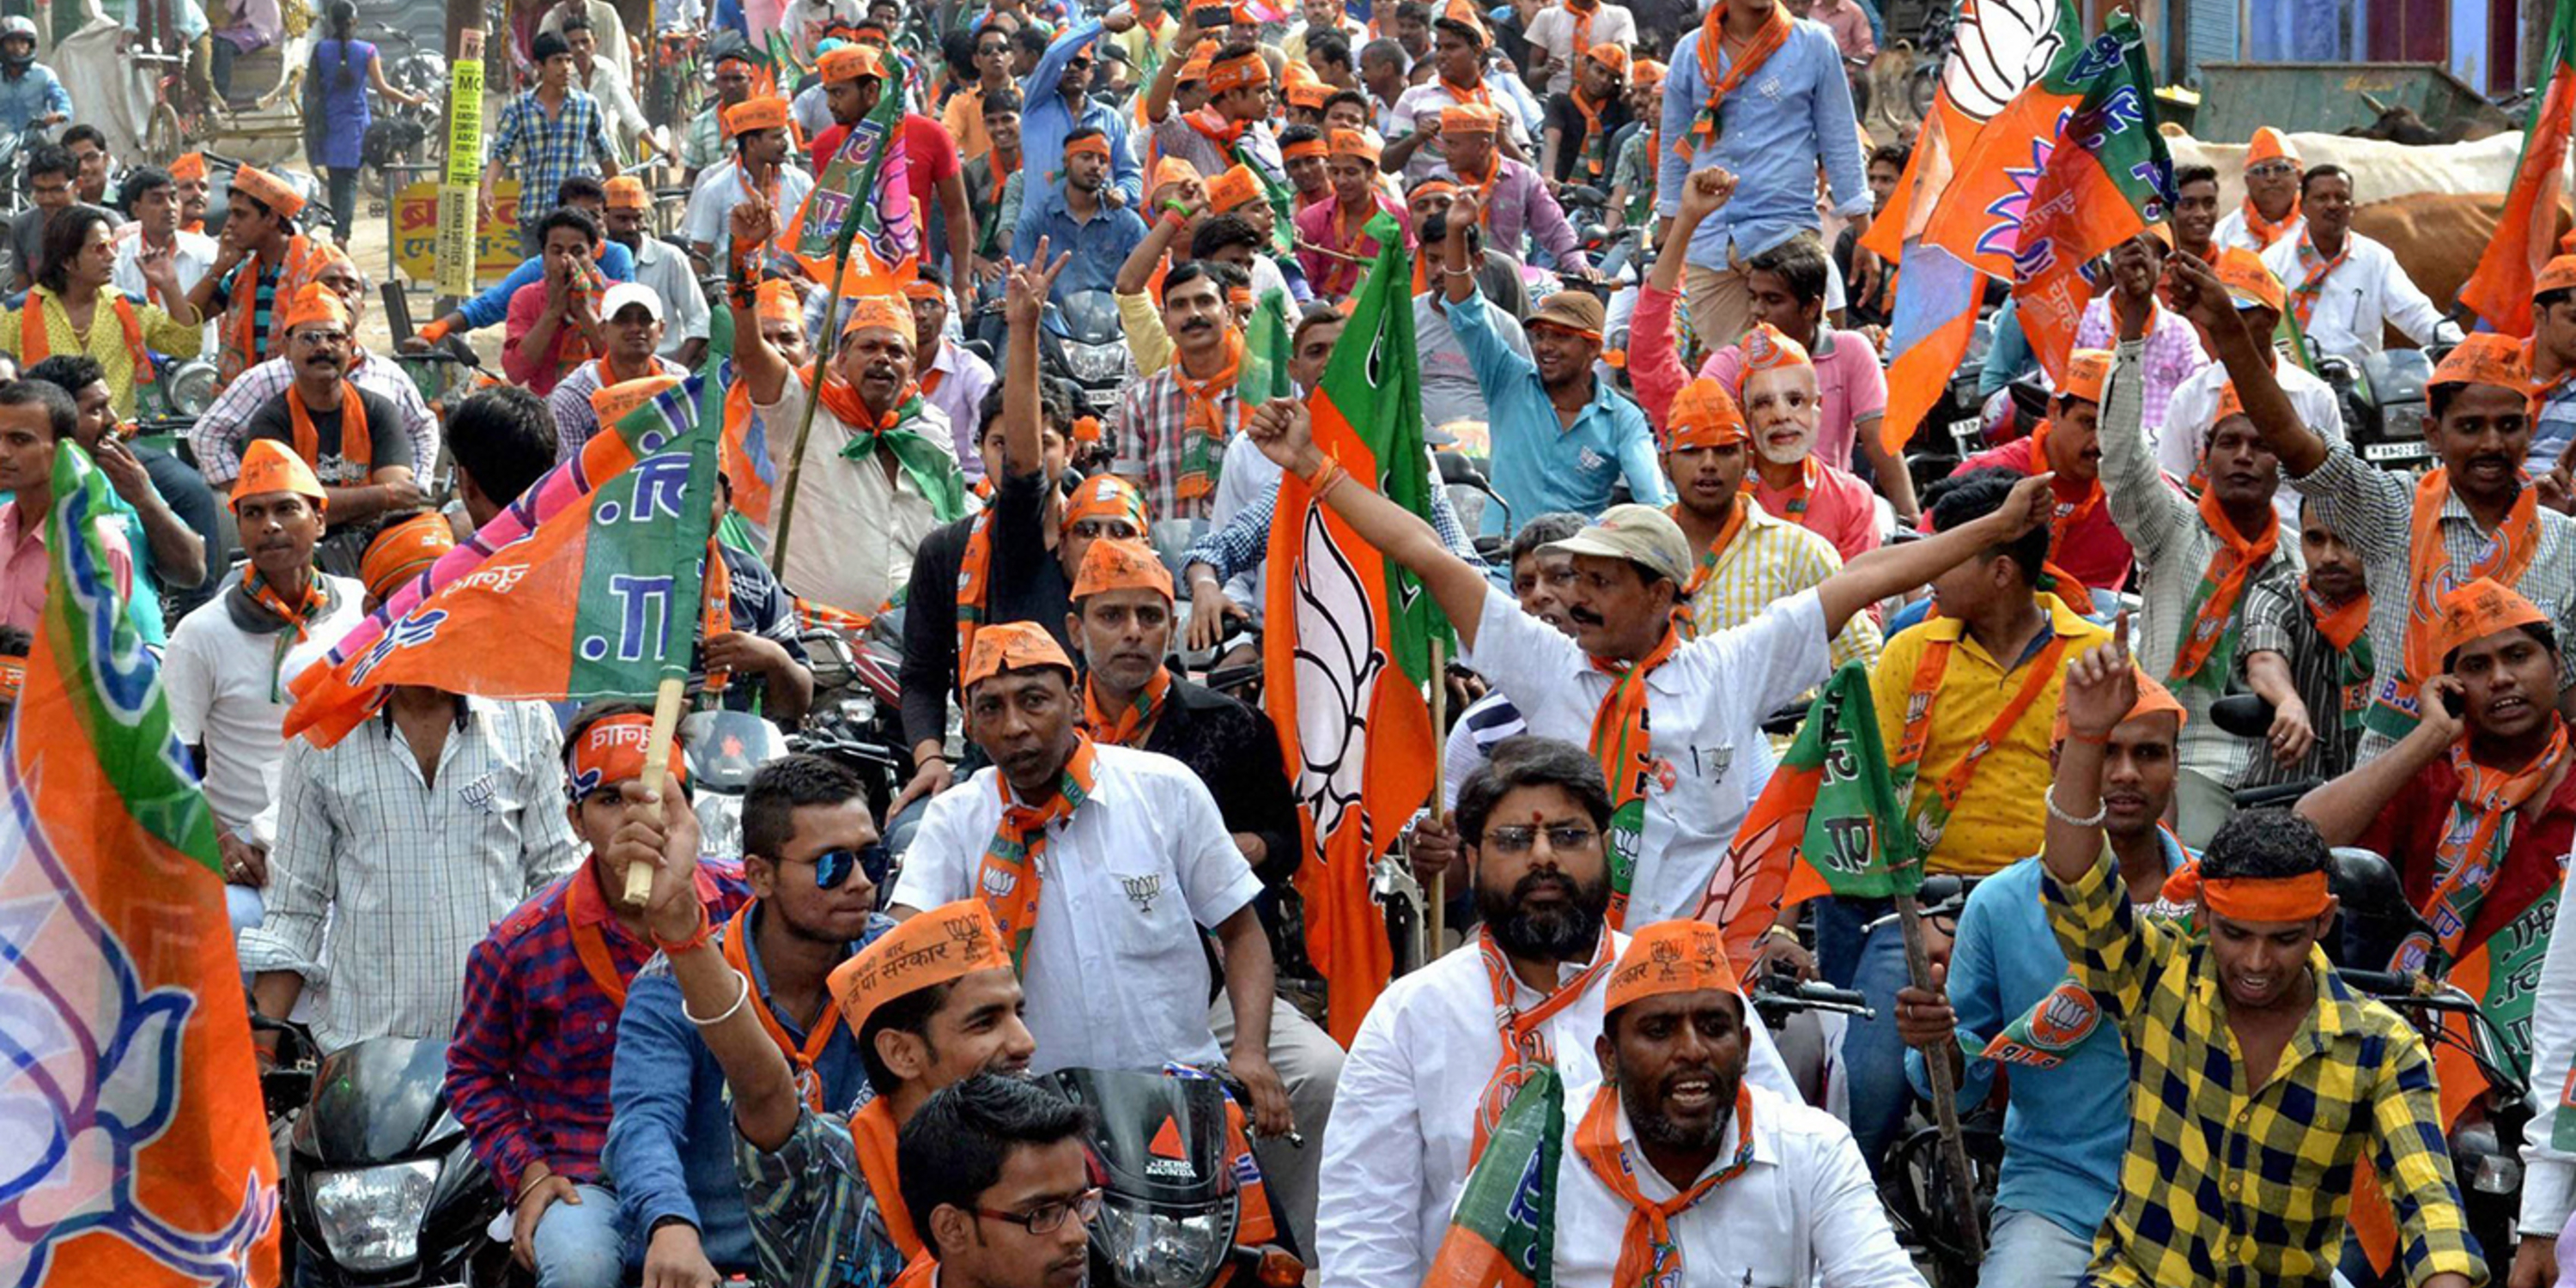 BJP rally in India